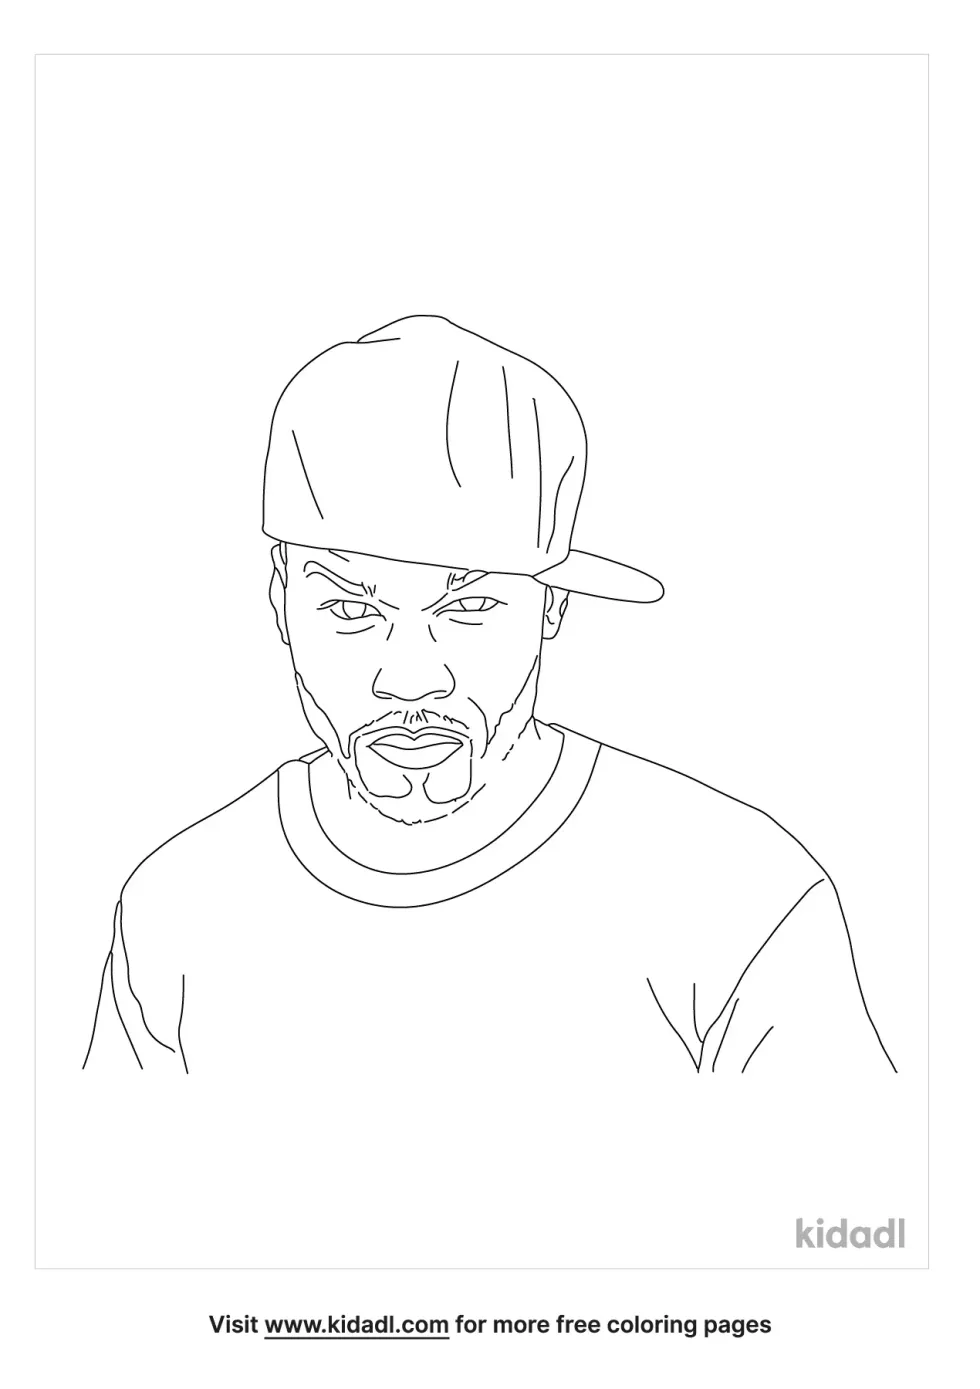 50 Cent Coloring Page